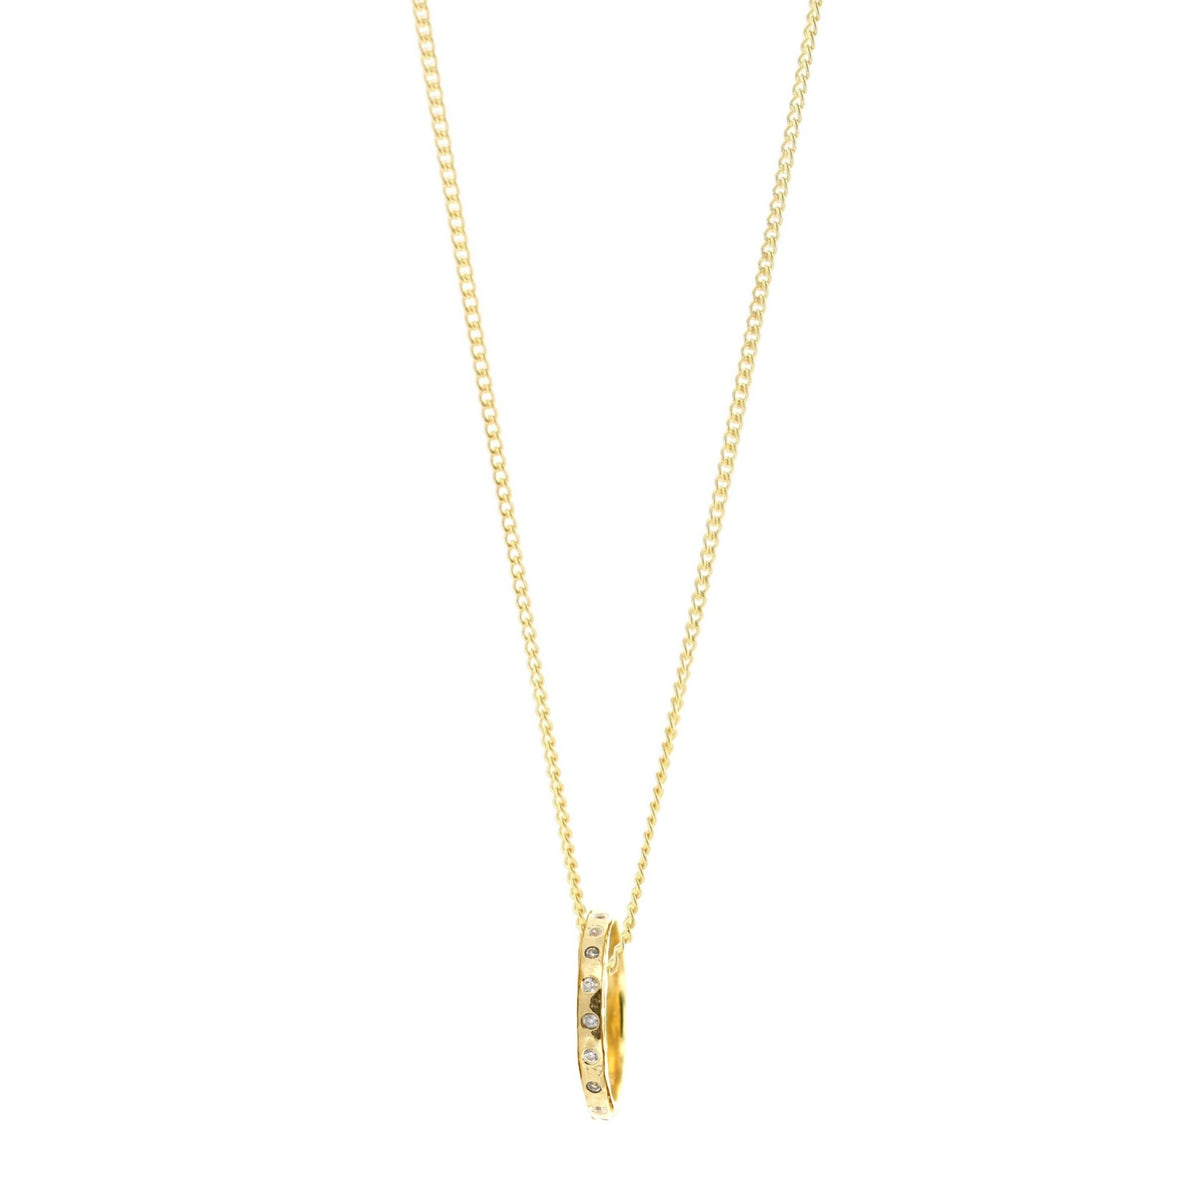 CHARMING 28-30&quot; NECKLACE GOLD - SO PRETTY CARA COTTER